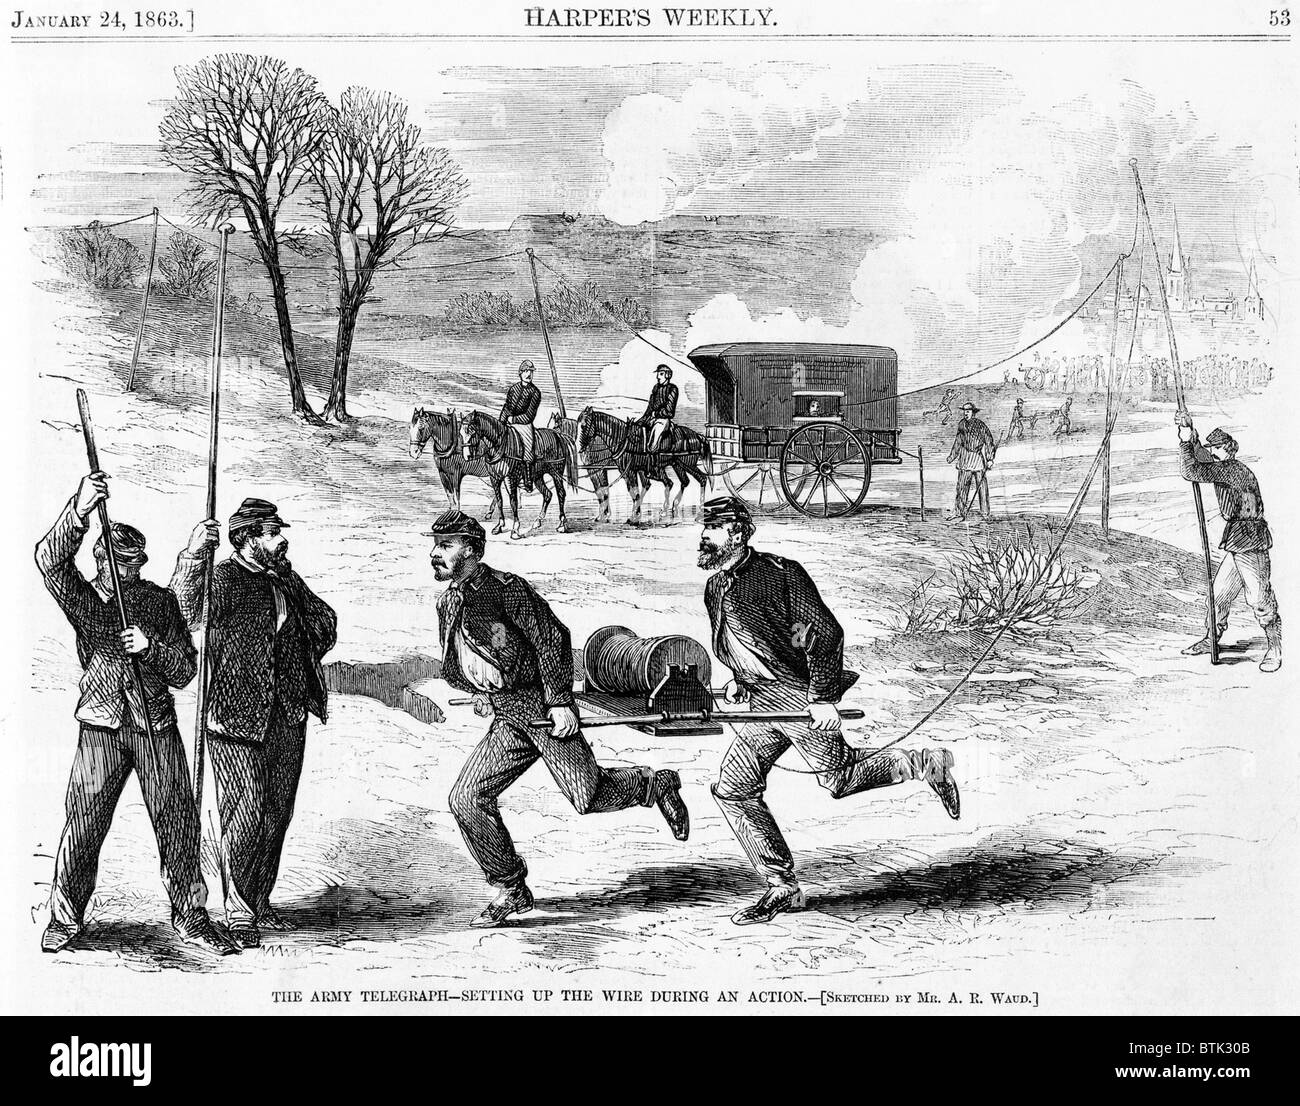 The Civil War. The Army telegraph - setting up the wire during the battle of Fredericksburg, Va. Woodcut by Alfred Waud, Dec. 1862 Stock Photo